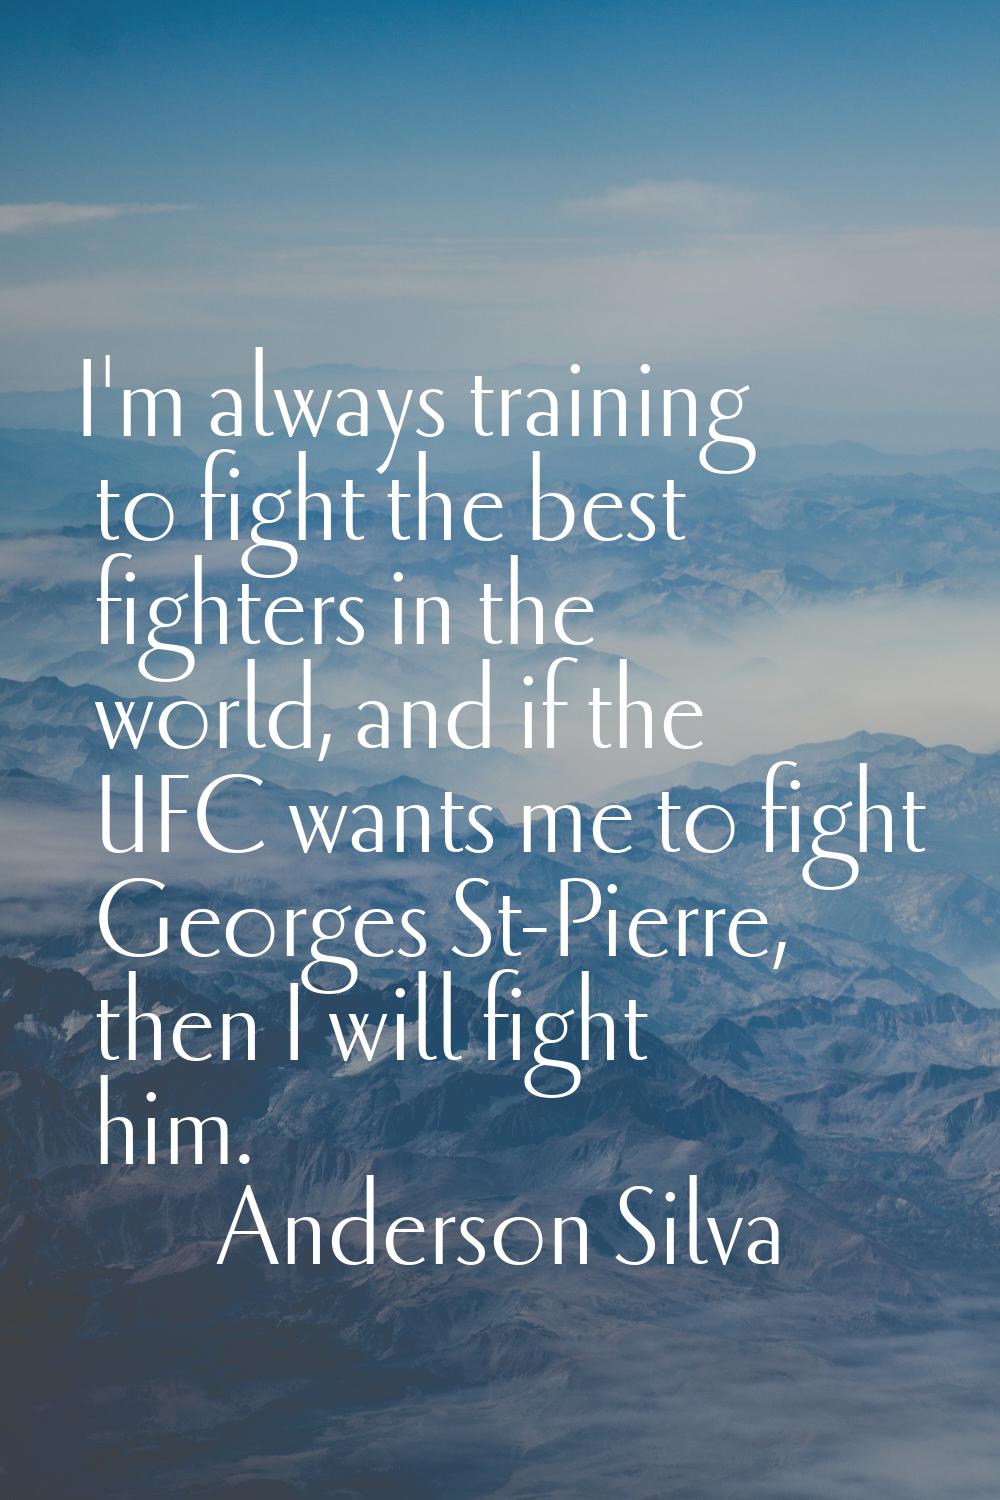 I'm always training to fight the best fighters in the world, and if the UFC wants me to fight Georg